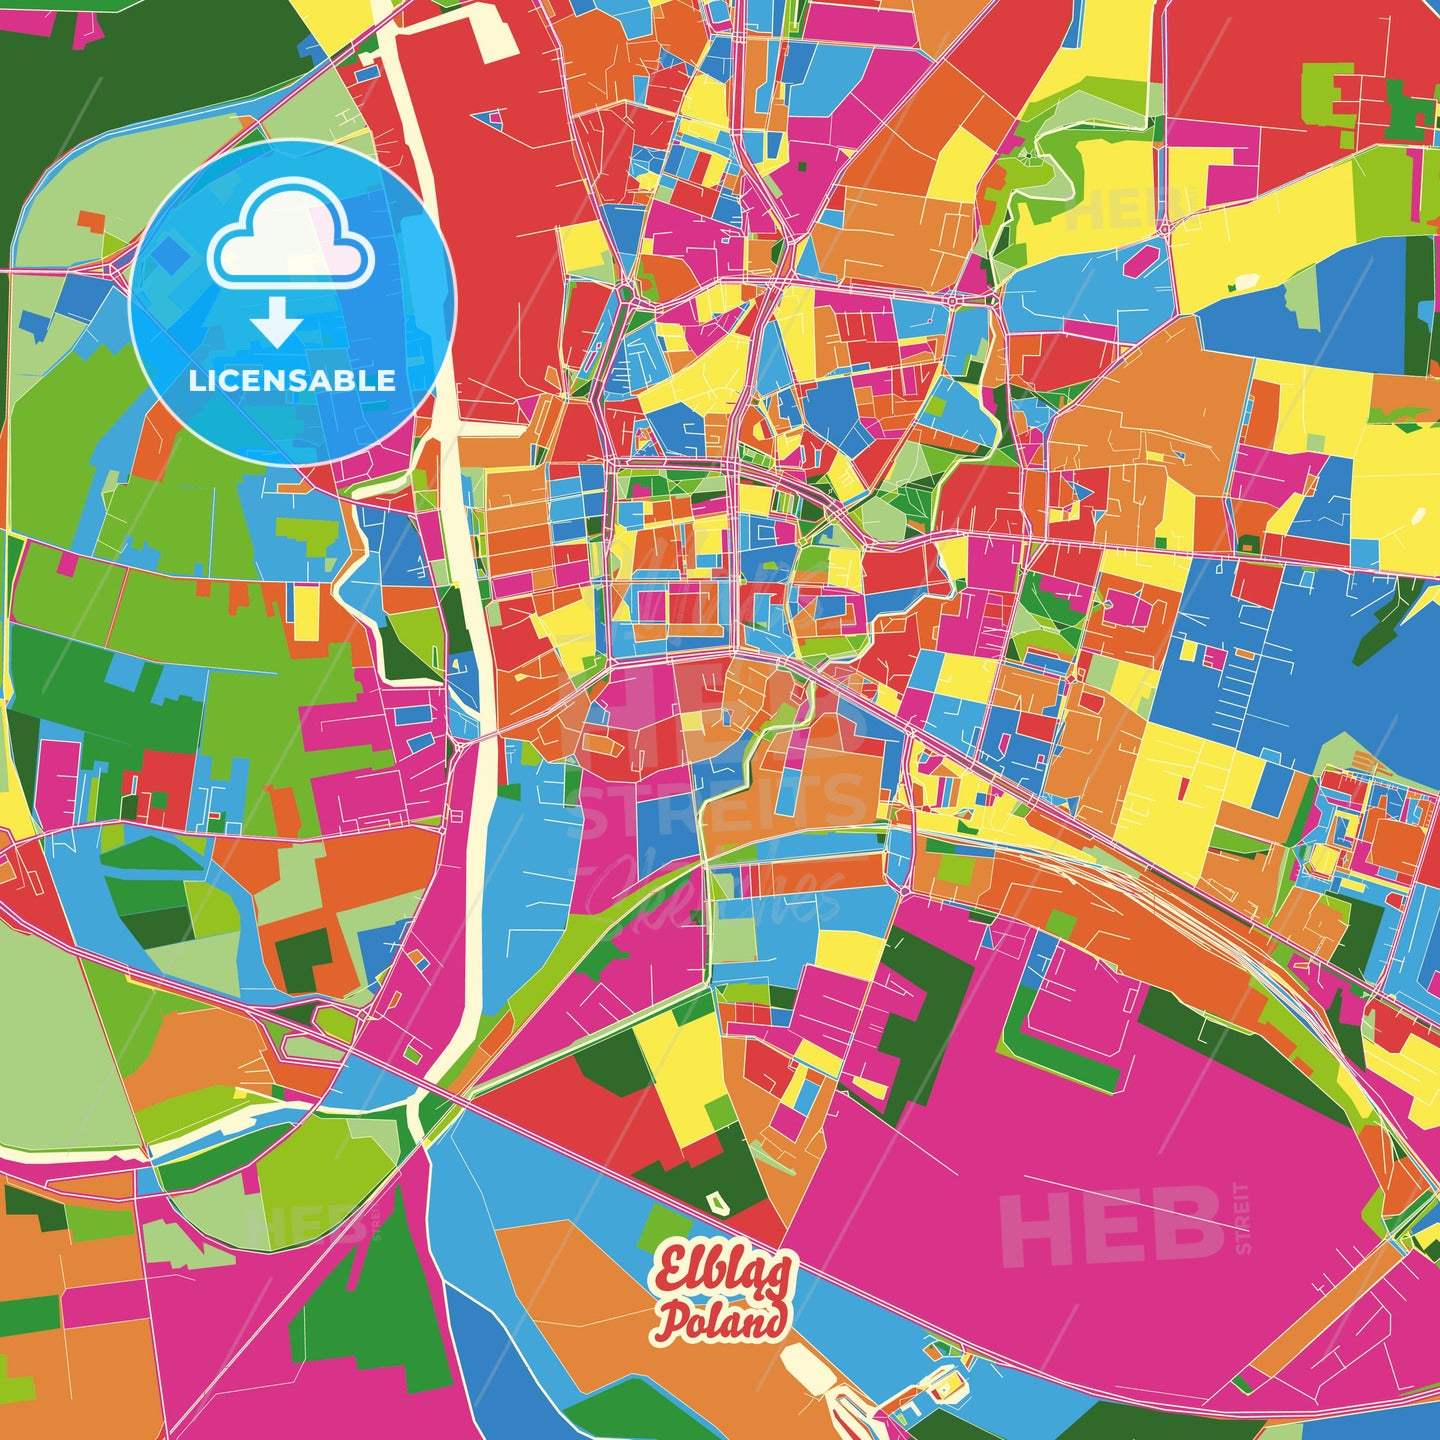 Elbląg, Poland Crazy Colorful Street Map Poster Template - HEBSTREITS Sketches